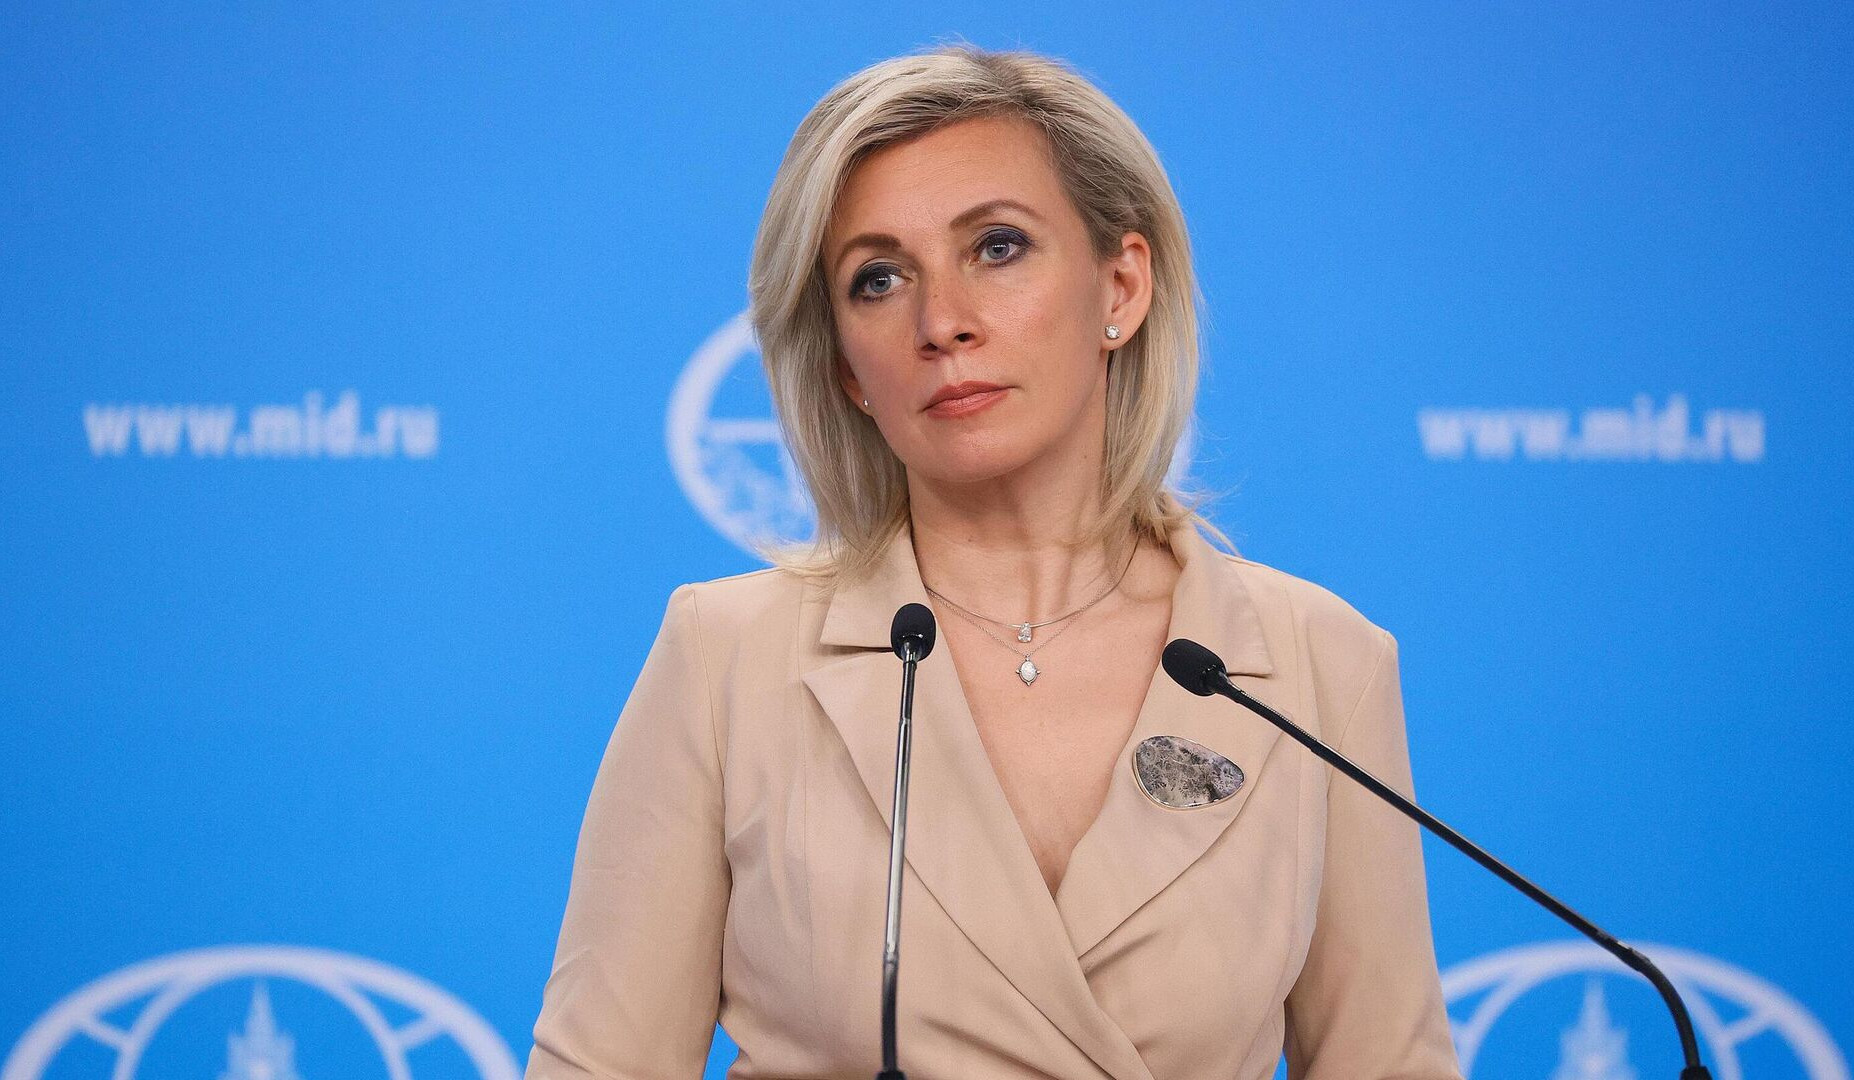 Neither Yerevan nor Baku dispute that the sovereignty over the routes belongs to the party whose territory they pass, Zakharova